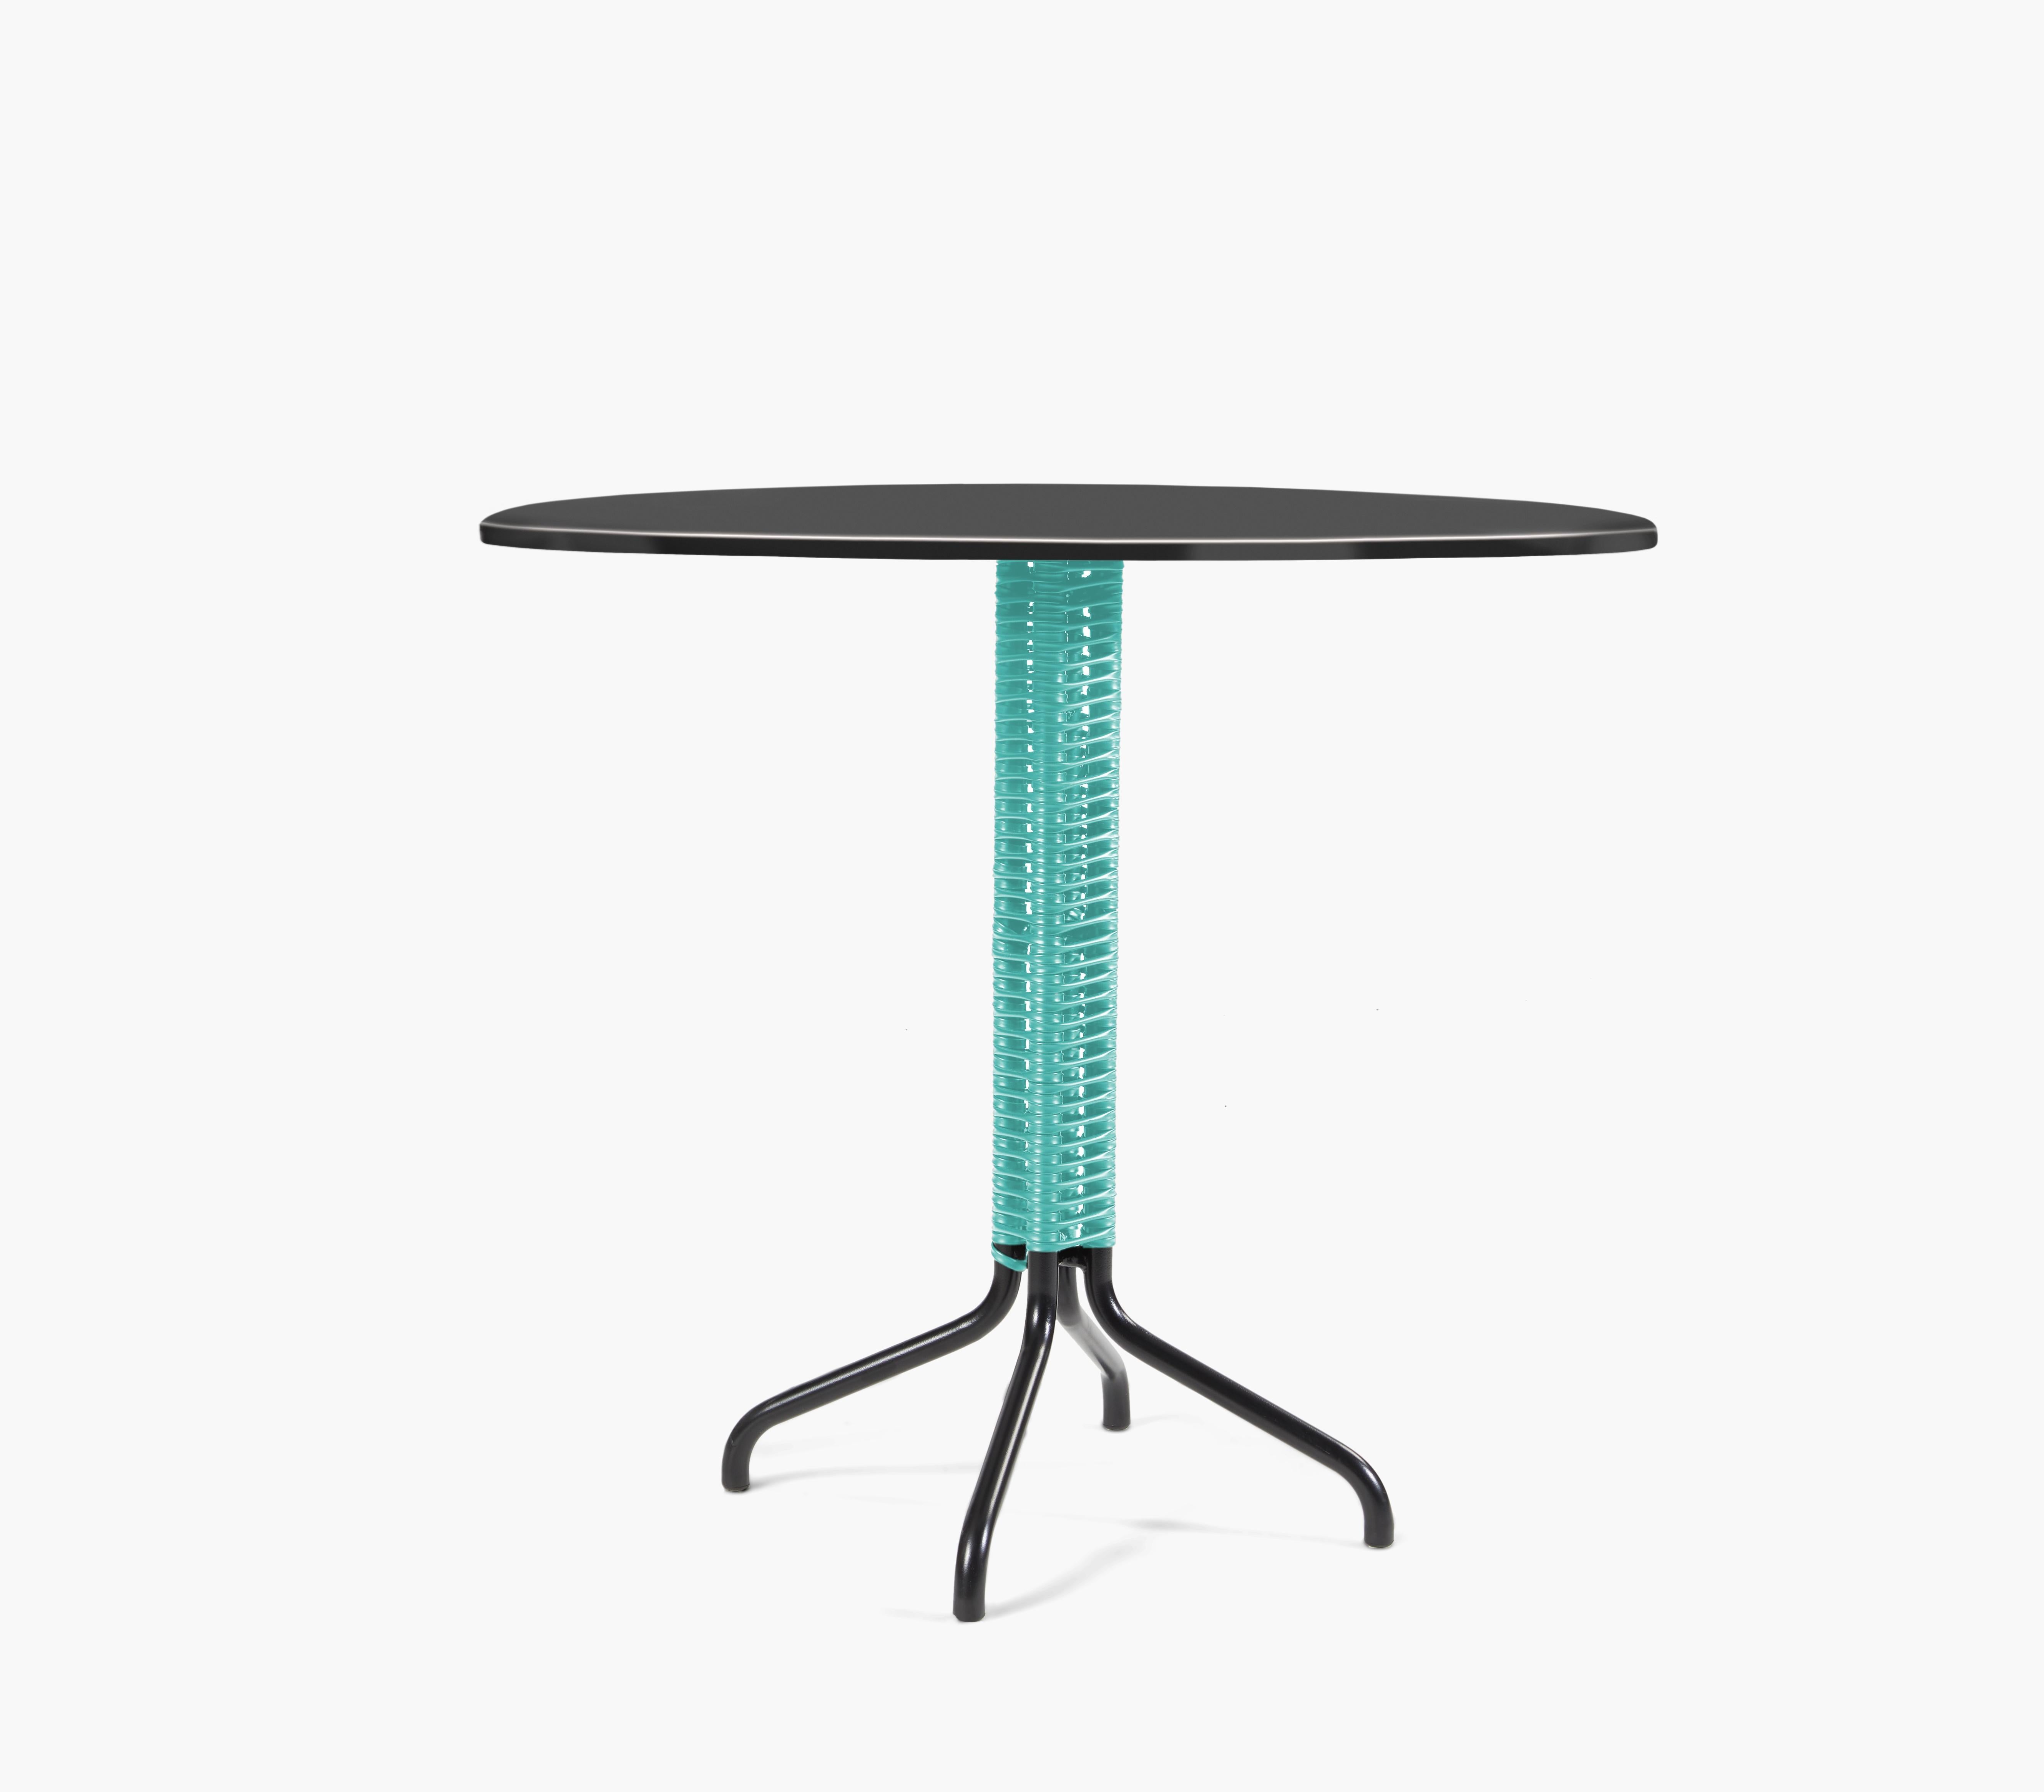 Cielo Bistro table by Sebastian Herkner
Dimensions: 60 x 73 x 60 cm
Materials: Steel

The popular cielo collection of chairs, loungers and lounge chairs - designed by Sebastian Herkner - is once again expanding: the elegant bistro table stands on